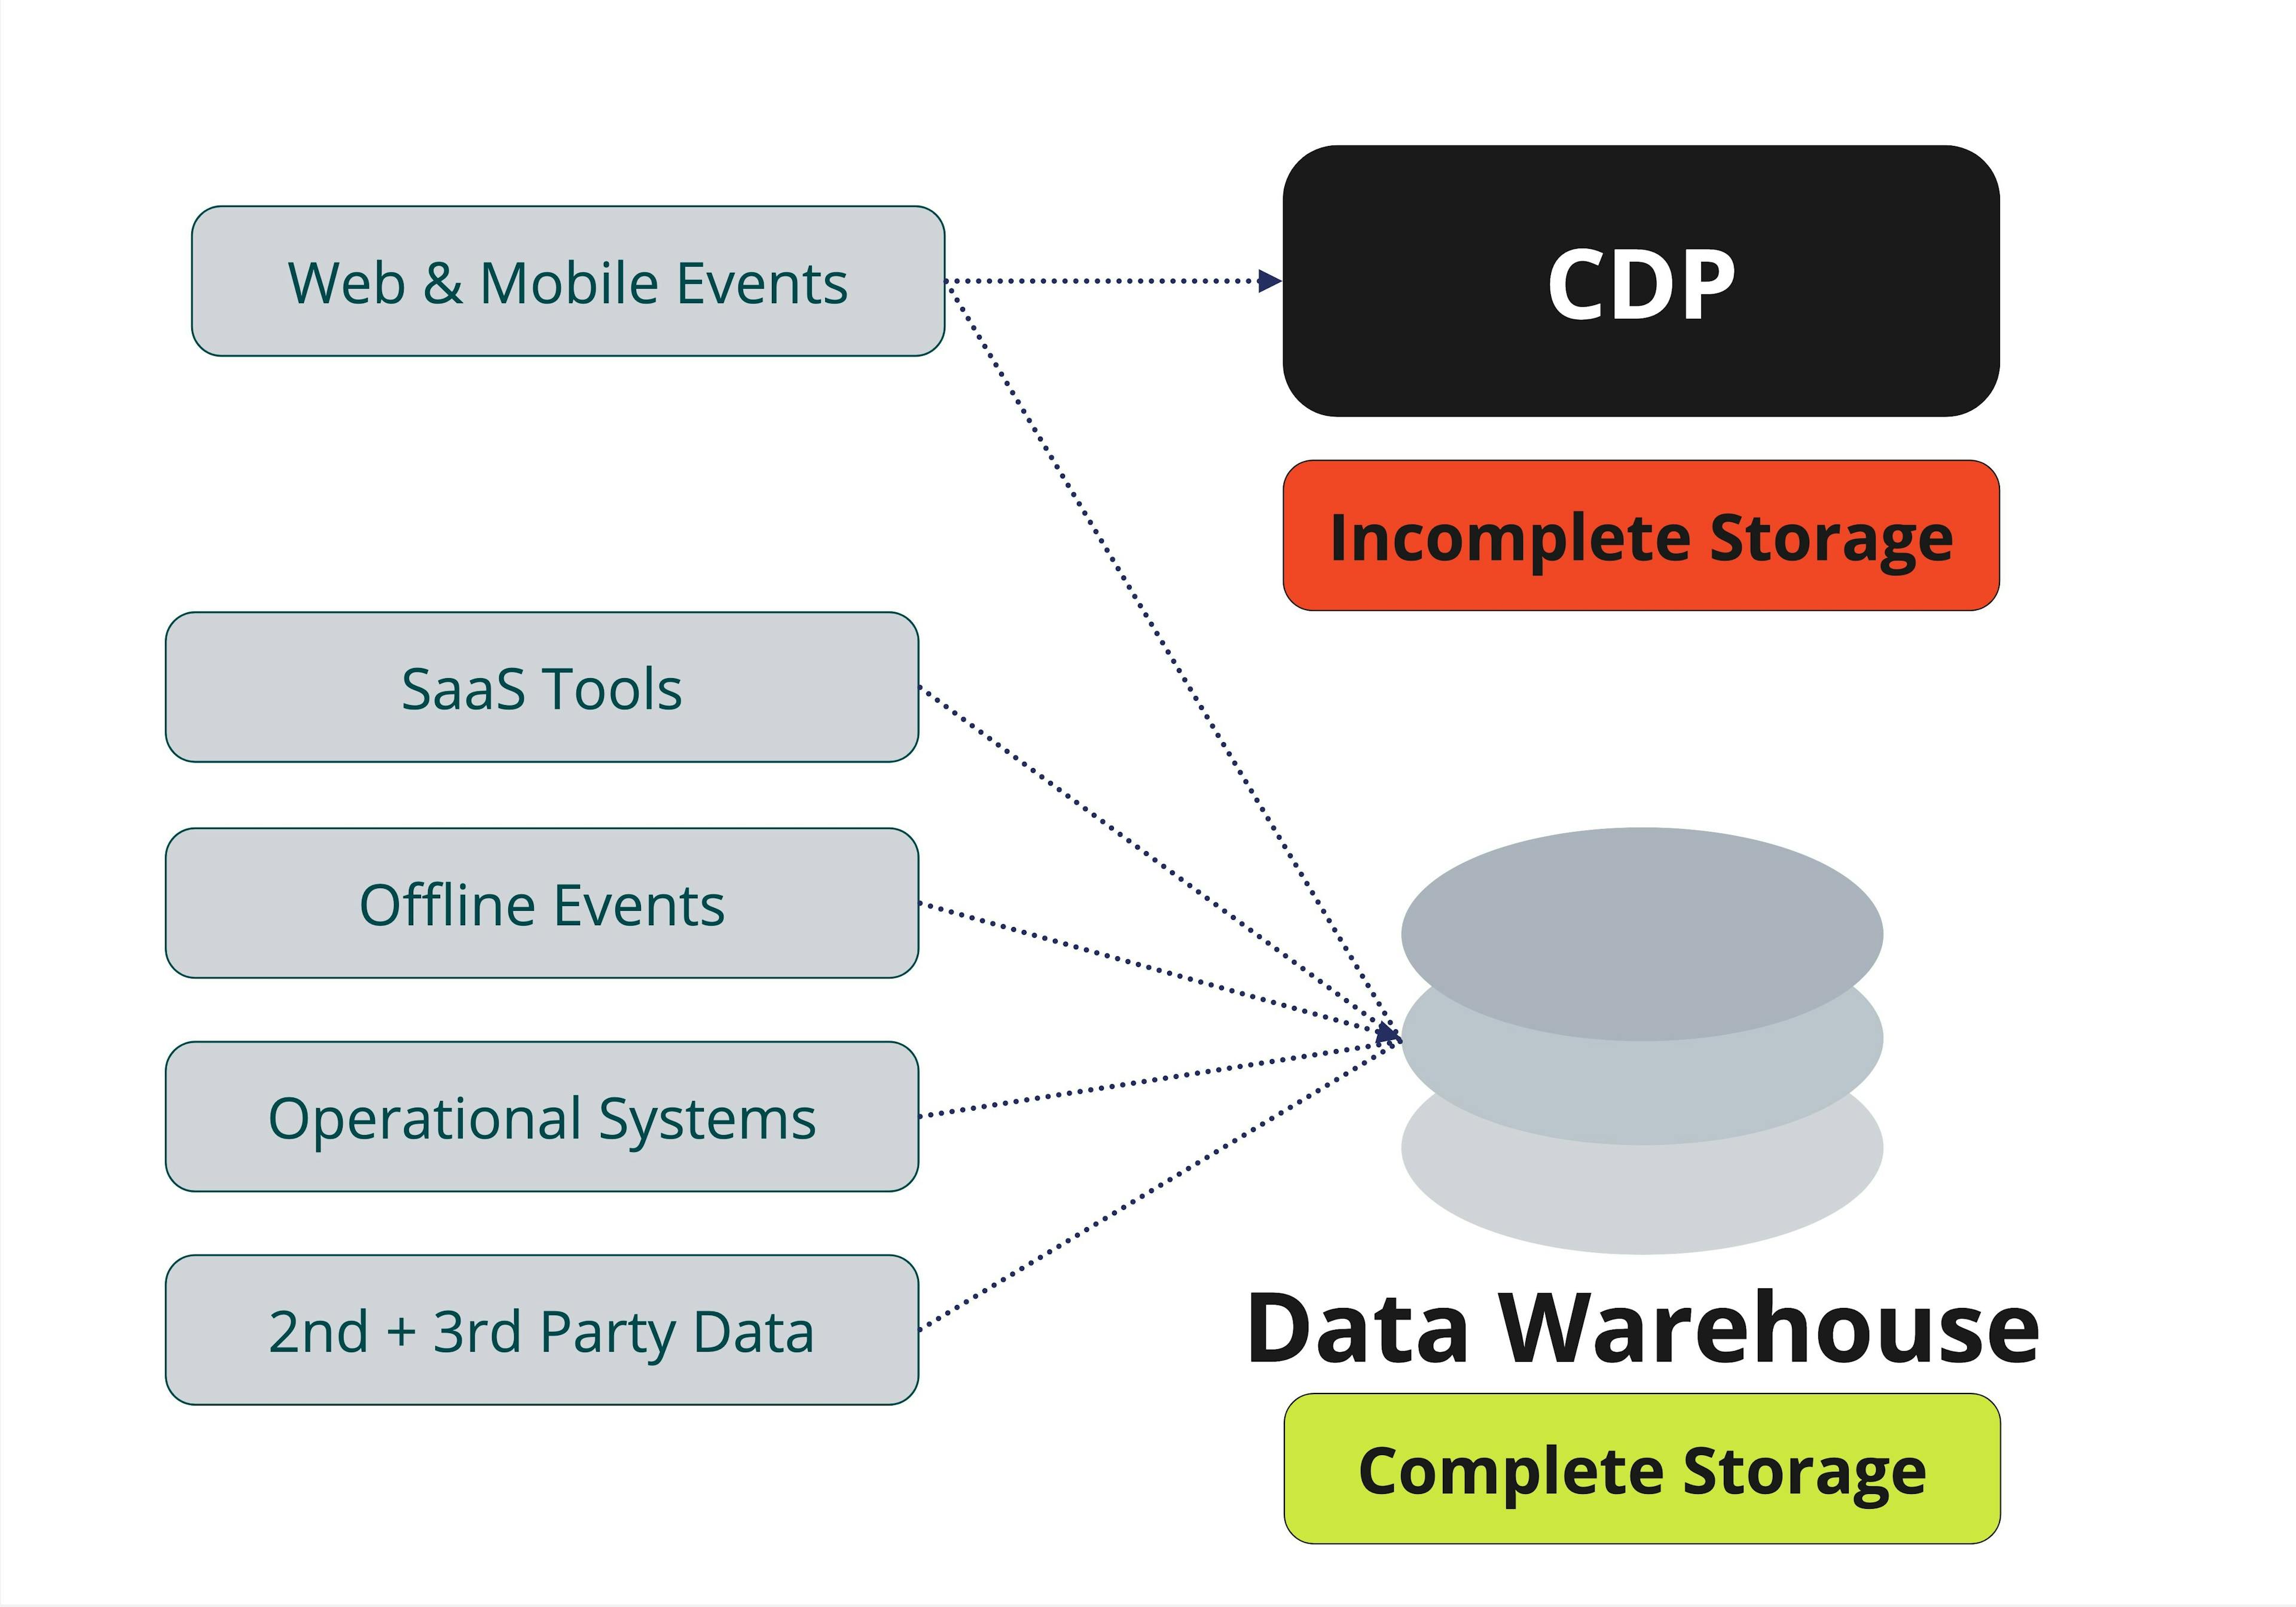 CDPs don't store all of a B2Bs data